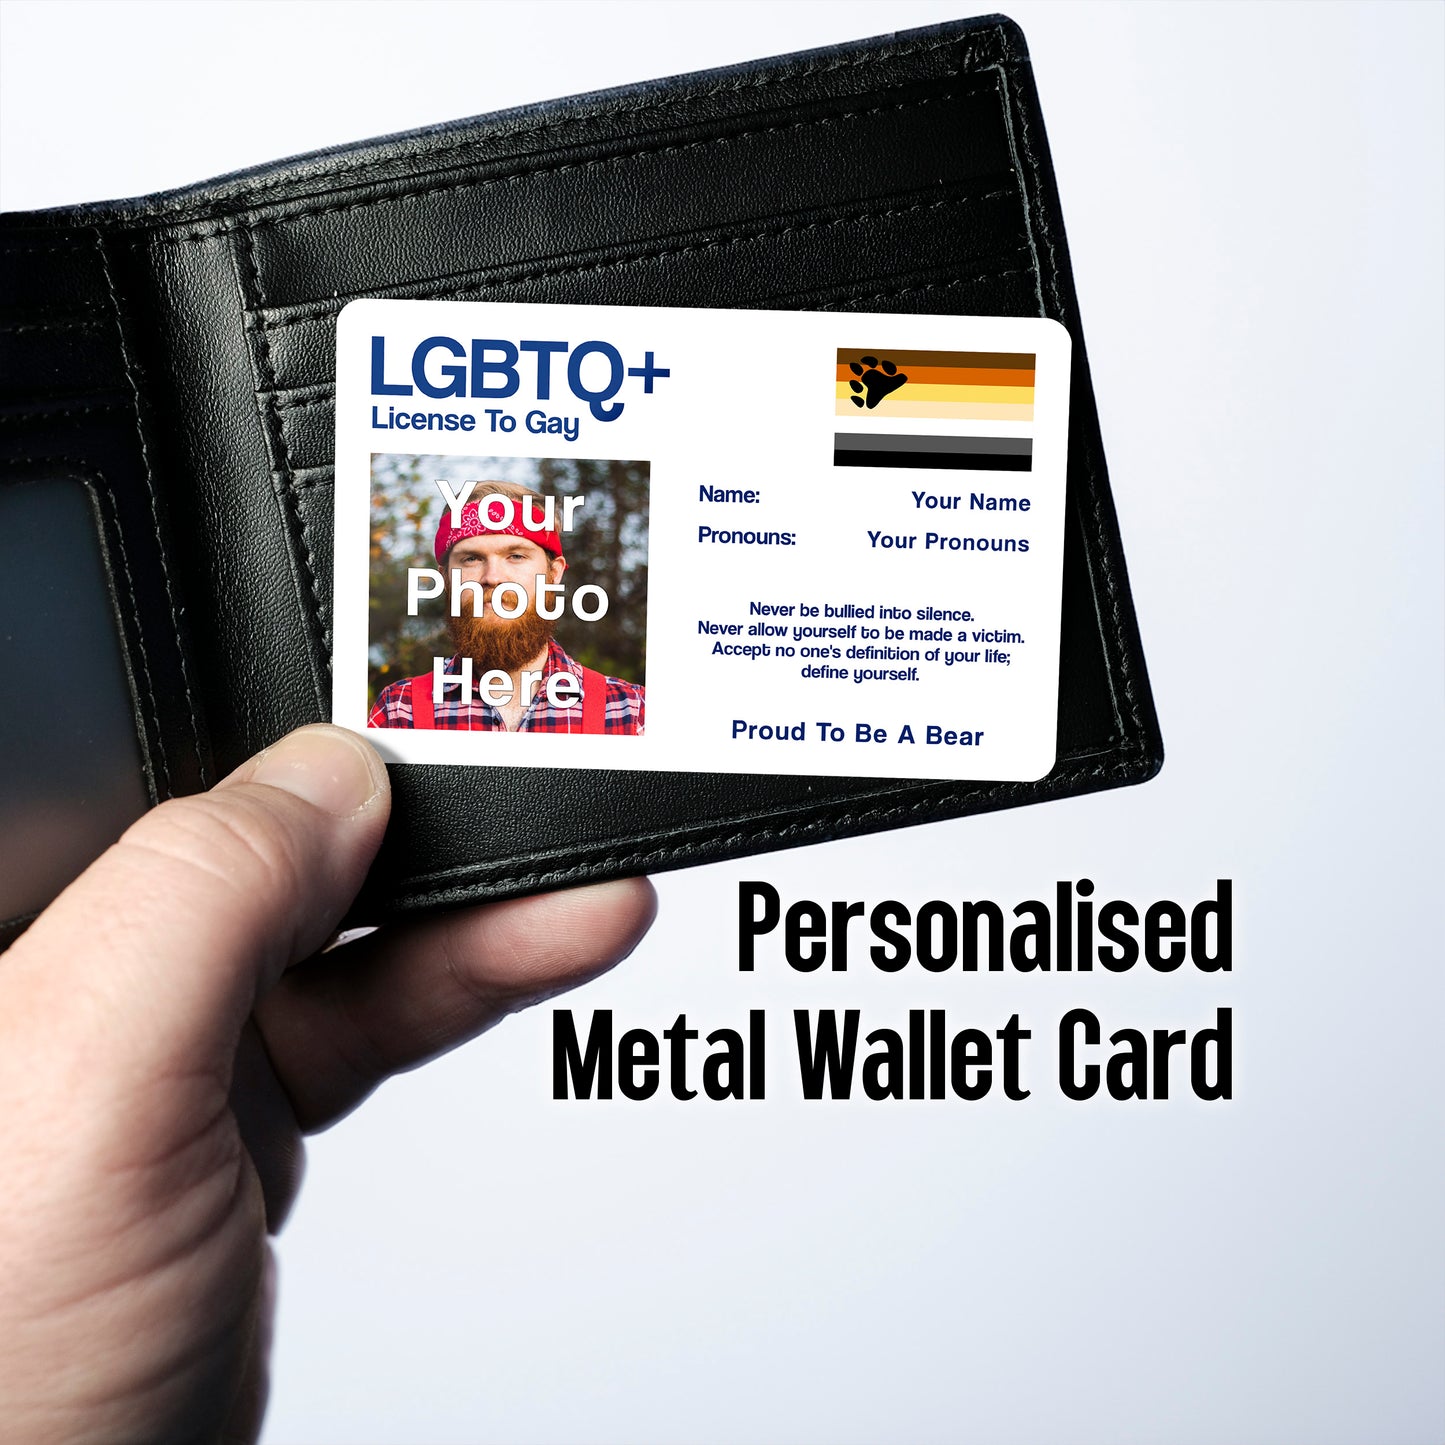 Bear license to gay aluminum wallet card personalised with your name, pronouns, and photo